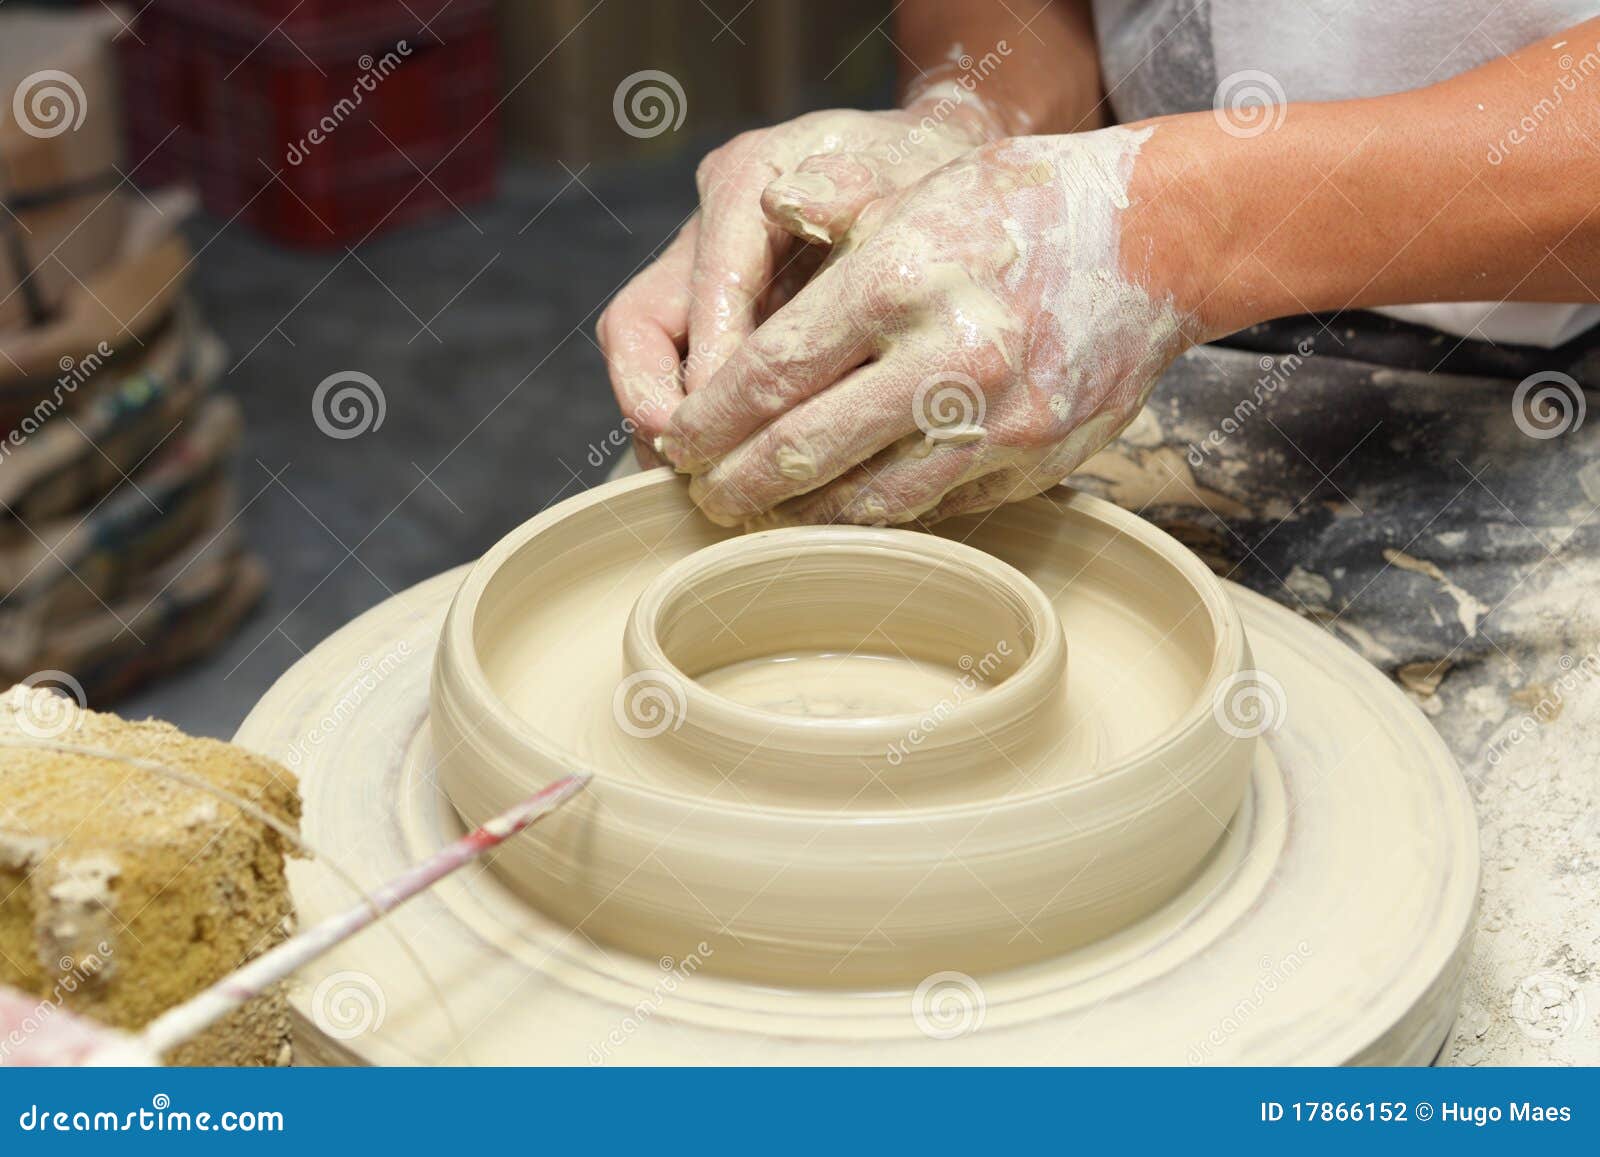 potter shaping clay in pottery